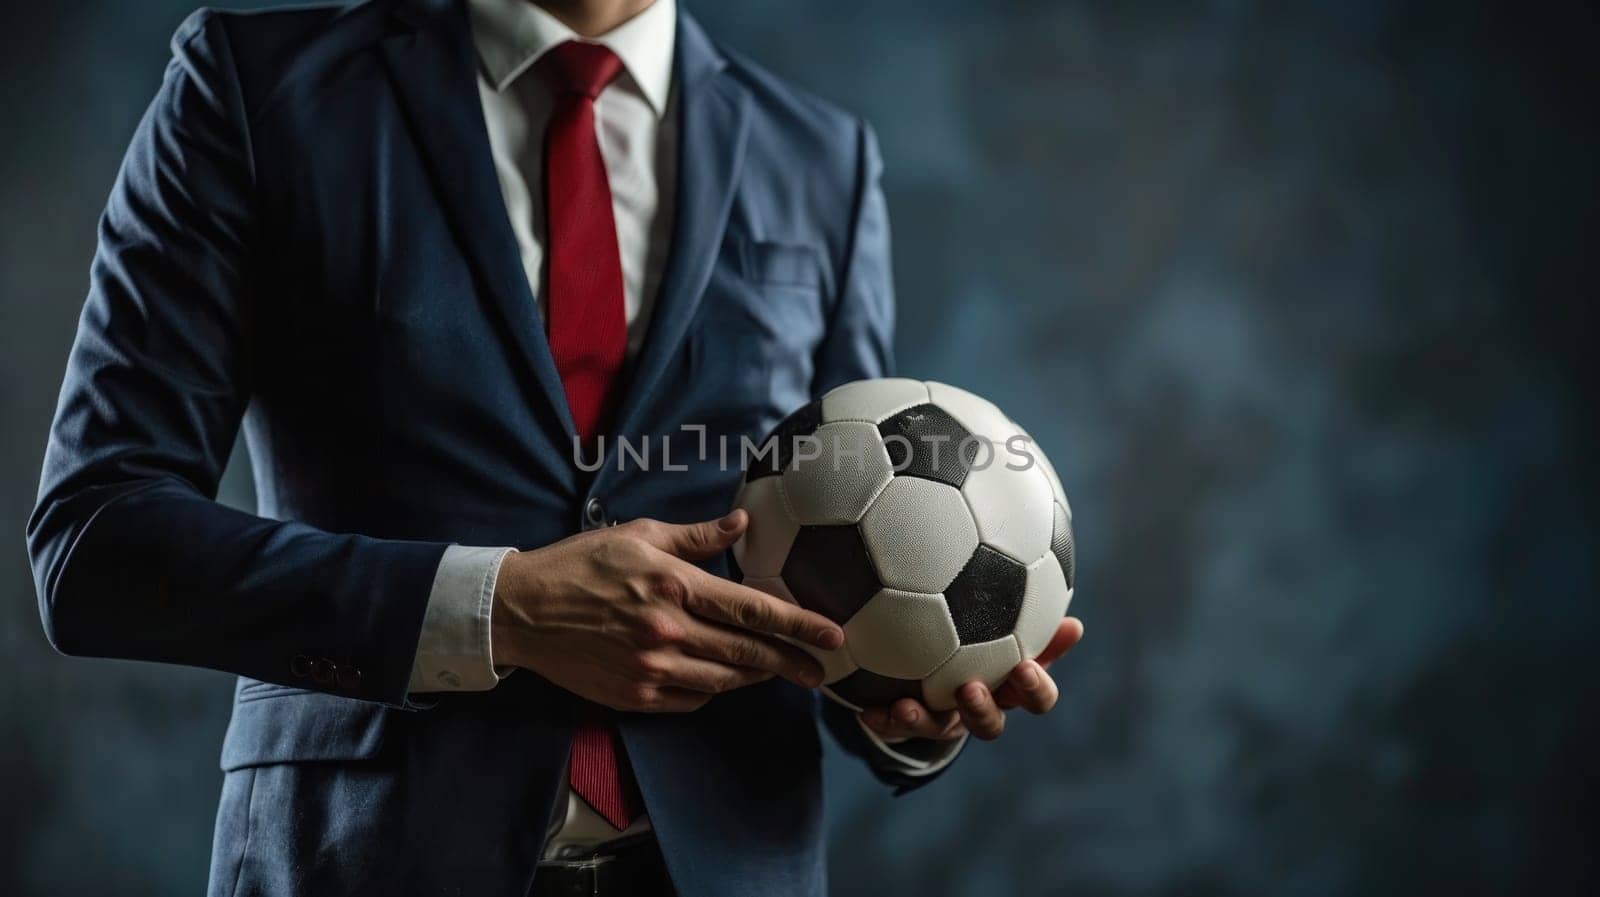 A football manager wear suit and red tie hand holding football.